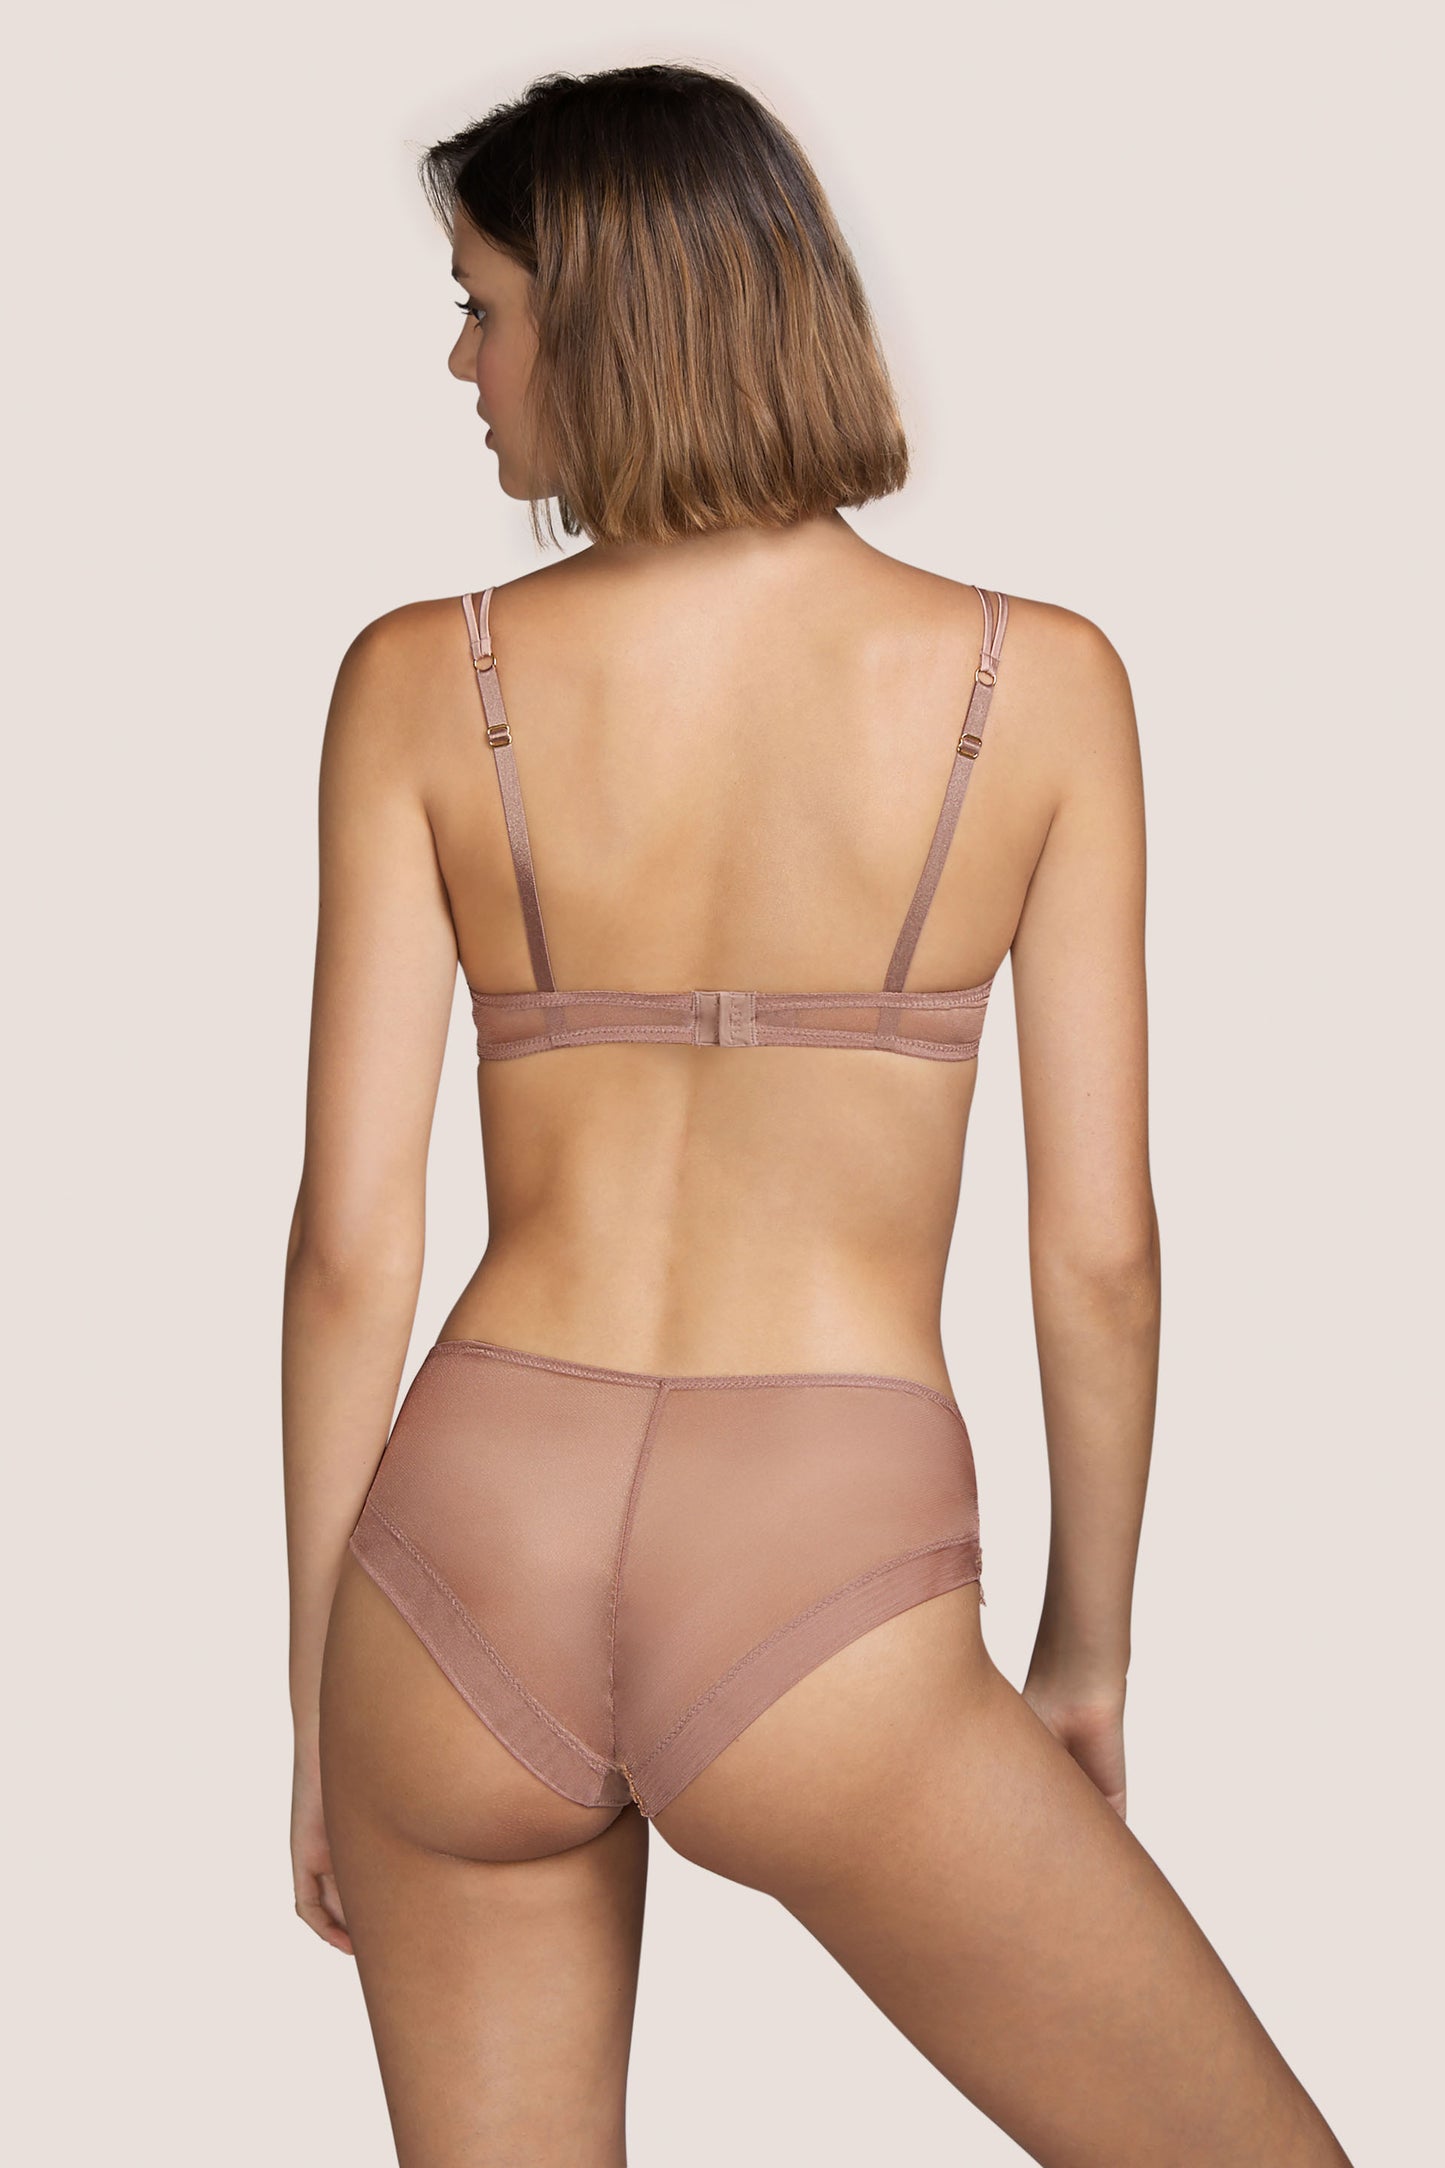 Andres Sarda Franklin push-up bh uitneembare pads make-up